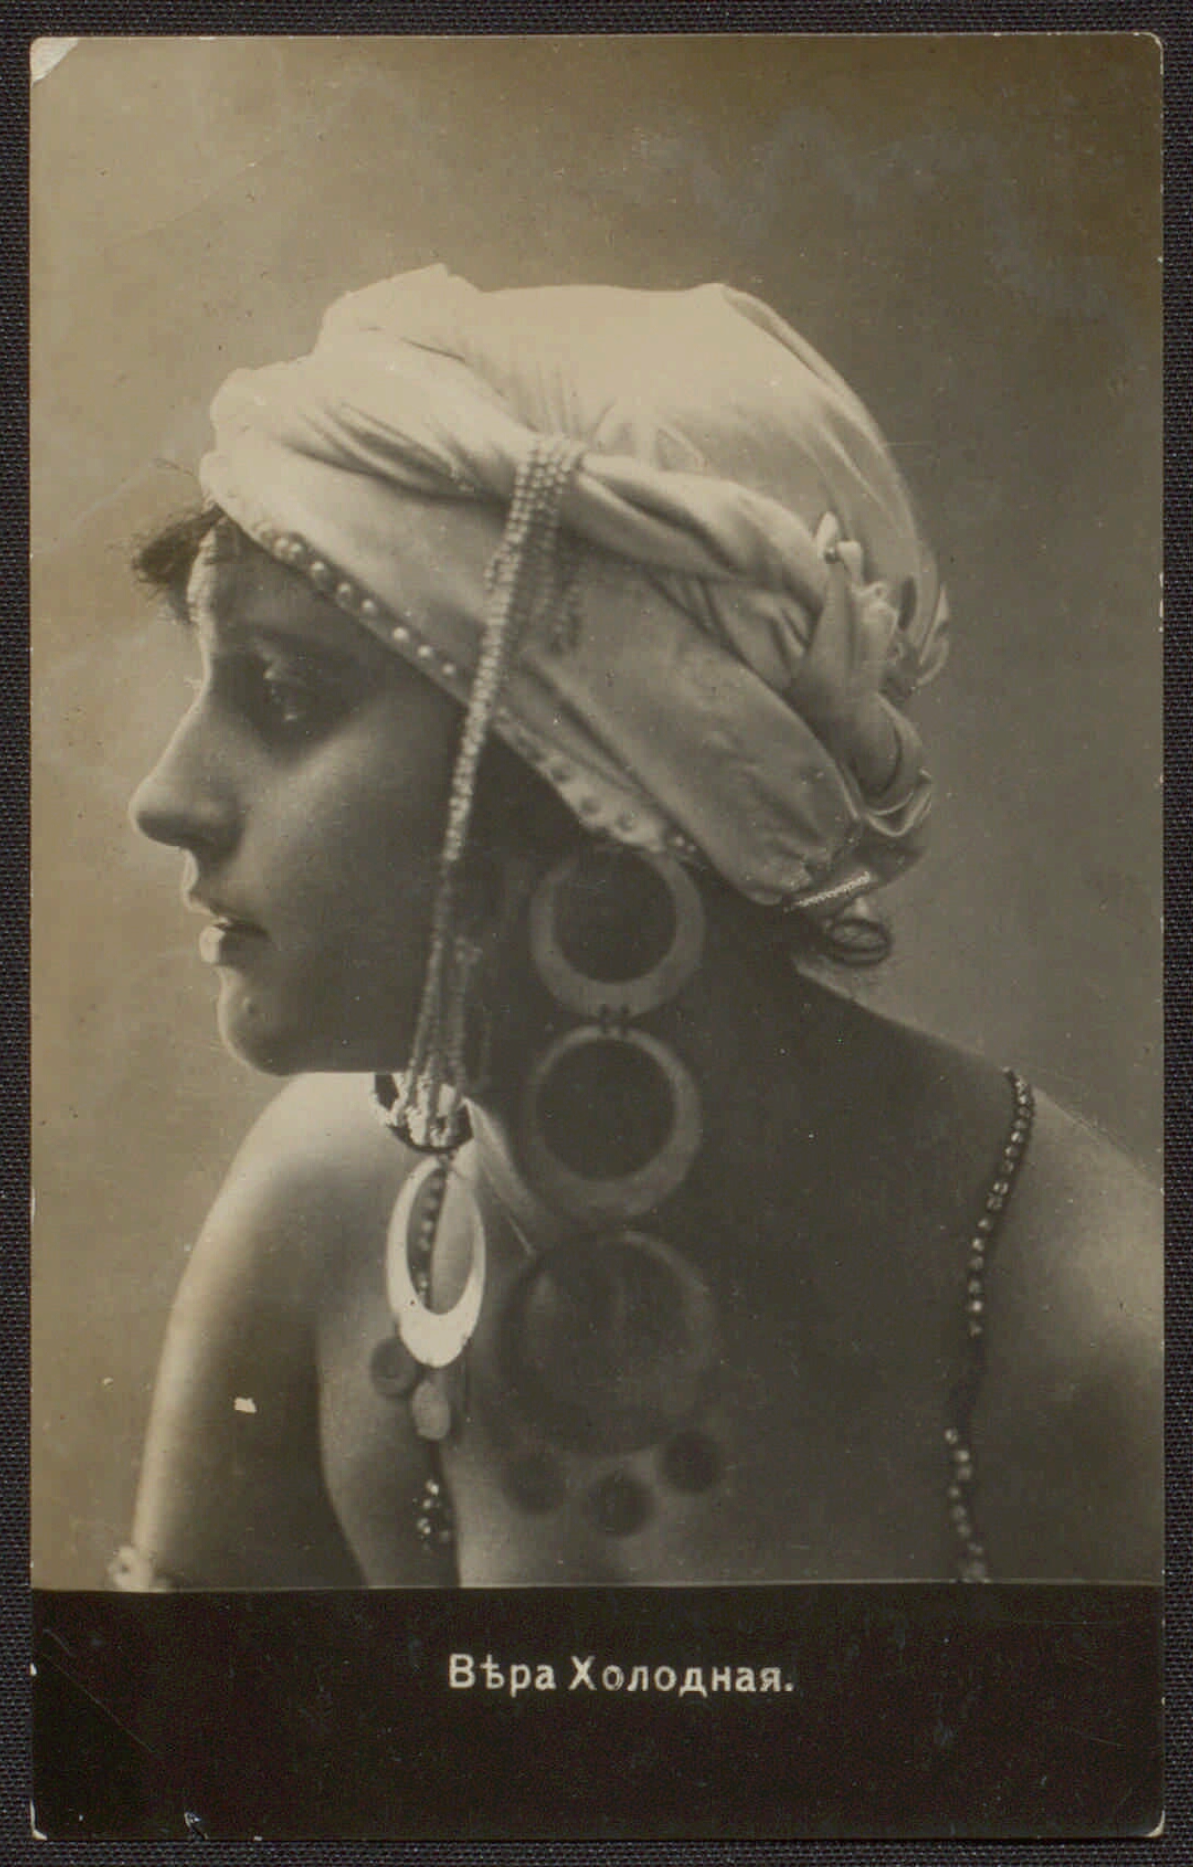 Vera Kholodnaya. Portrait, profile to the left, in a light kerchief tied around the head like a turban, with long earrings consisting of three large circles. Between 1914 and 1919. Postcard from the collection of Natalia Balachenkova. | src Presidential Library